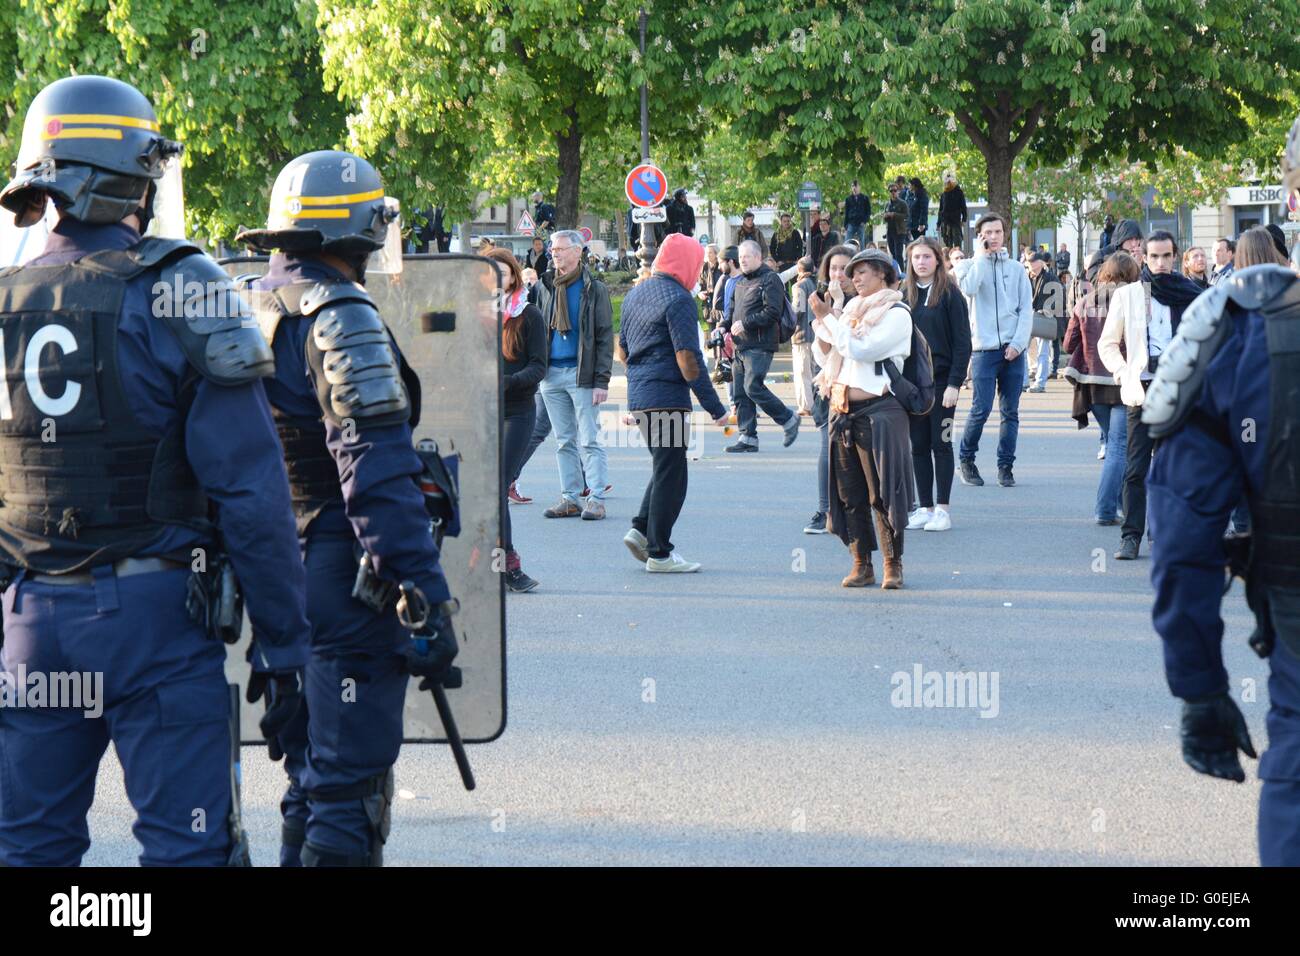 Paris, France. 1 May 2016. French CRS Police officers face off against members of the public following clashes in Paris' Place de la Nation. Credit: Marc Ward/Alamy Live News Stock Photo